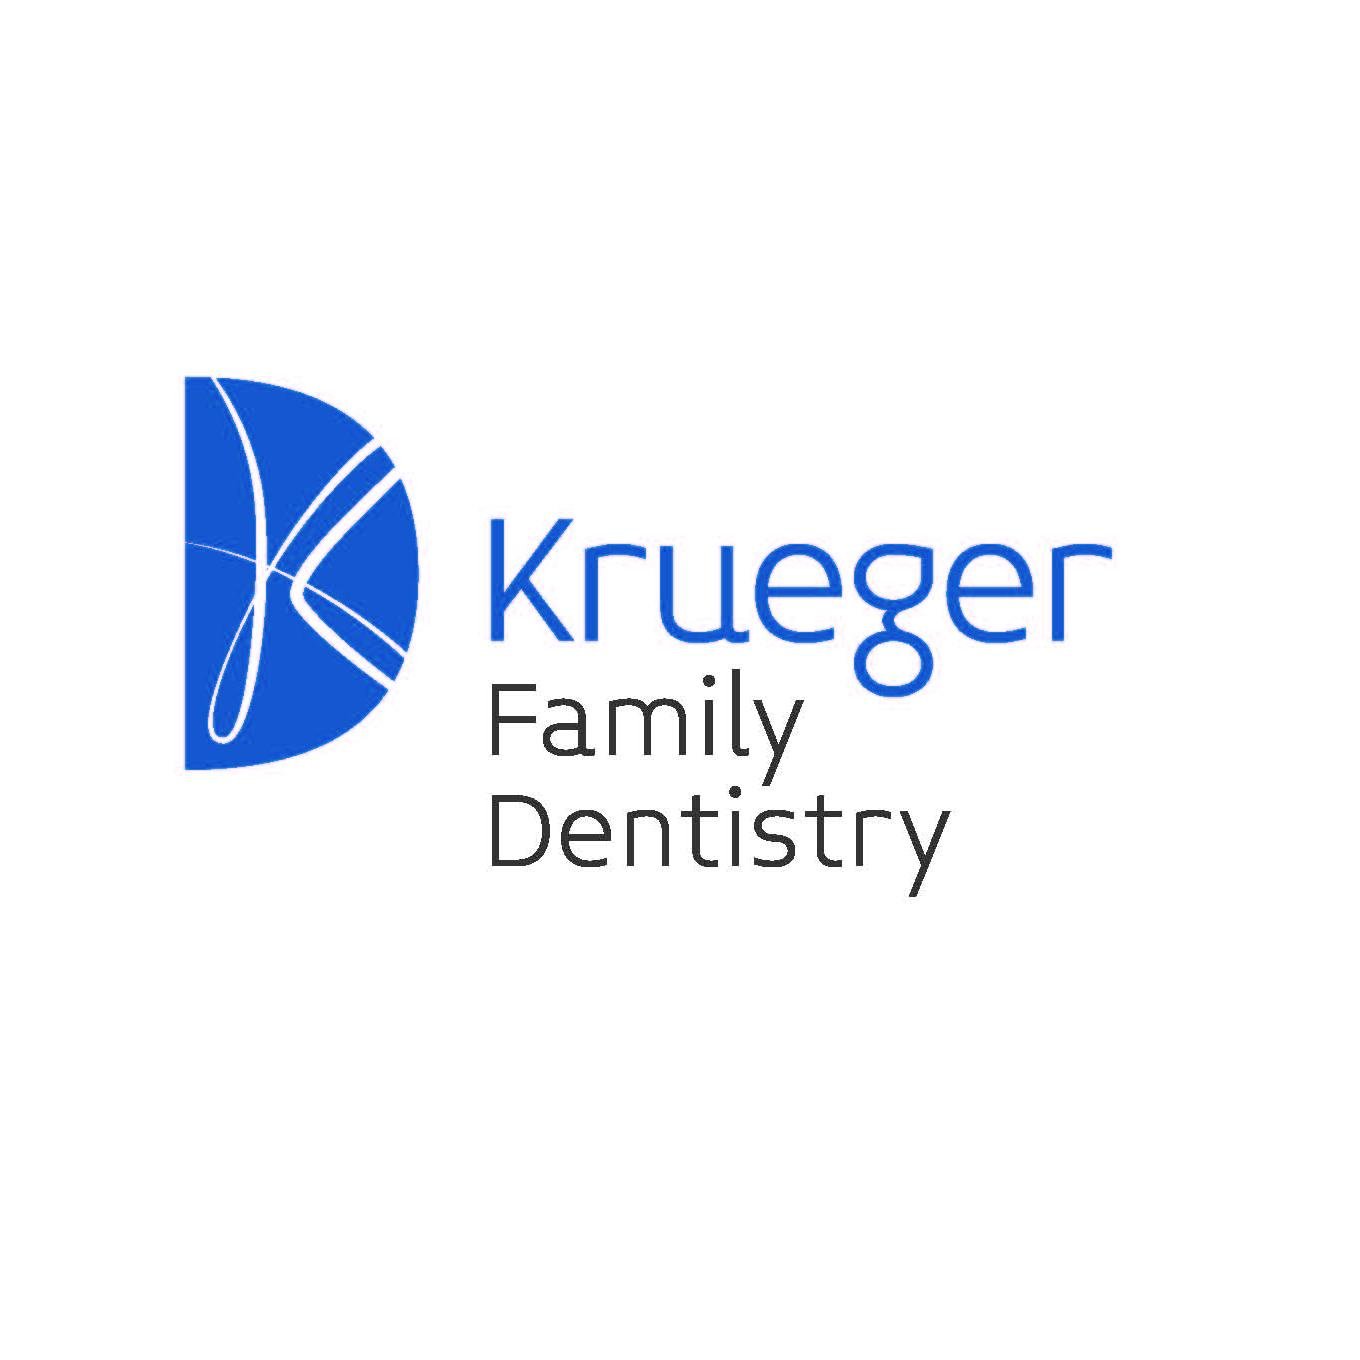 Dr. Krueger has lived in Lincoln, Nebraska since 1998 and is excited to be treating patients in the family oriented city of Lincoln.